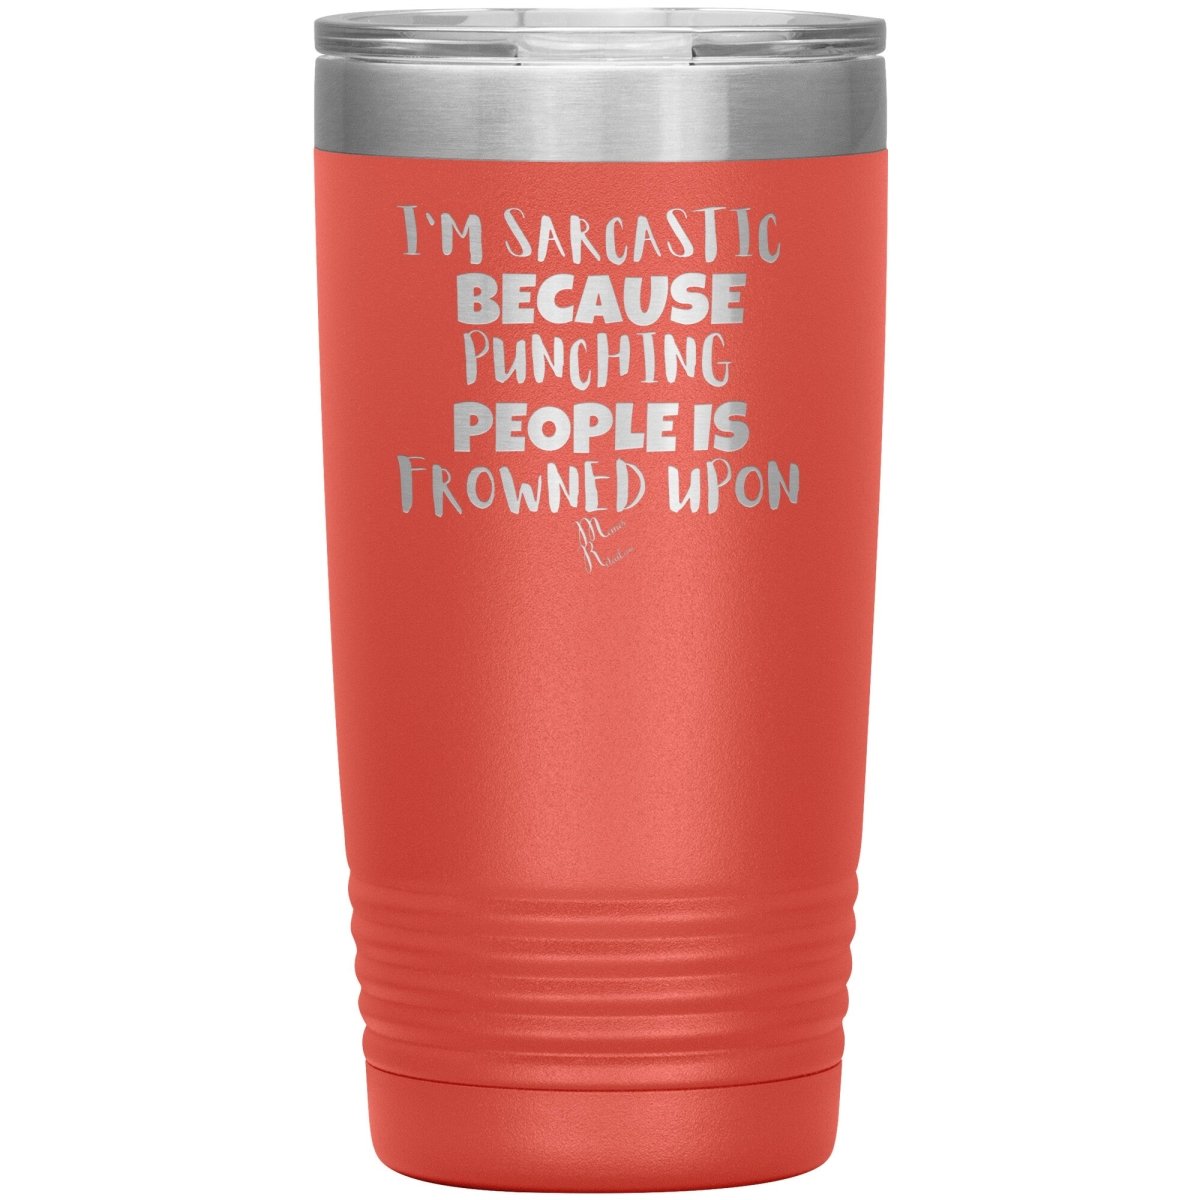 I'm Sarcastic Because Punching People is Frowned Upon Tumblers, 20oz Insulated Tumbler / Coral - MemesRetail.com